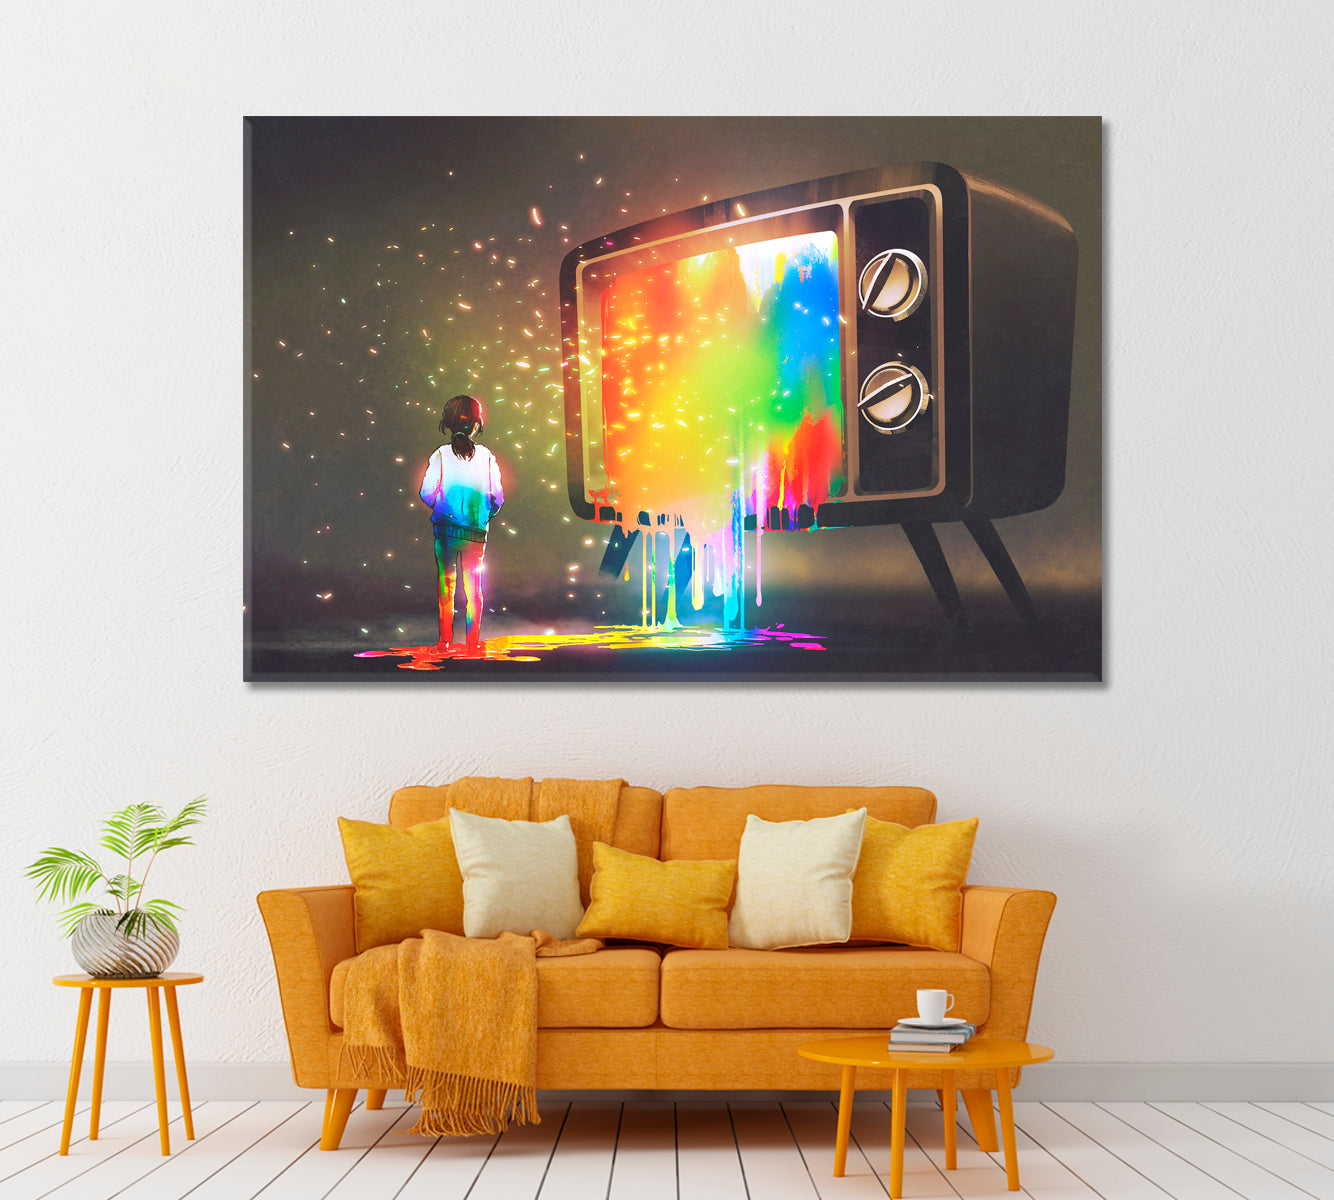 Bright Paint Flows From TV to Little Girl Canvas Print ArtLexy 1 Panel 24"x16" inches 